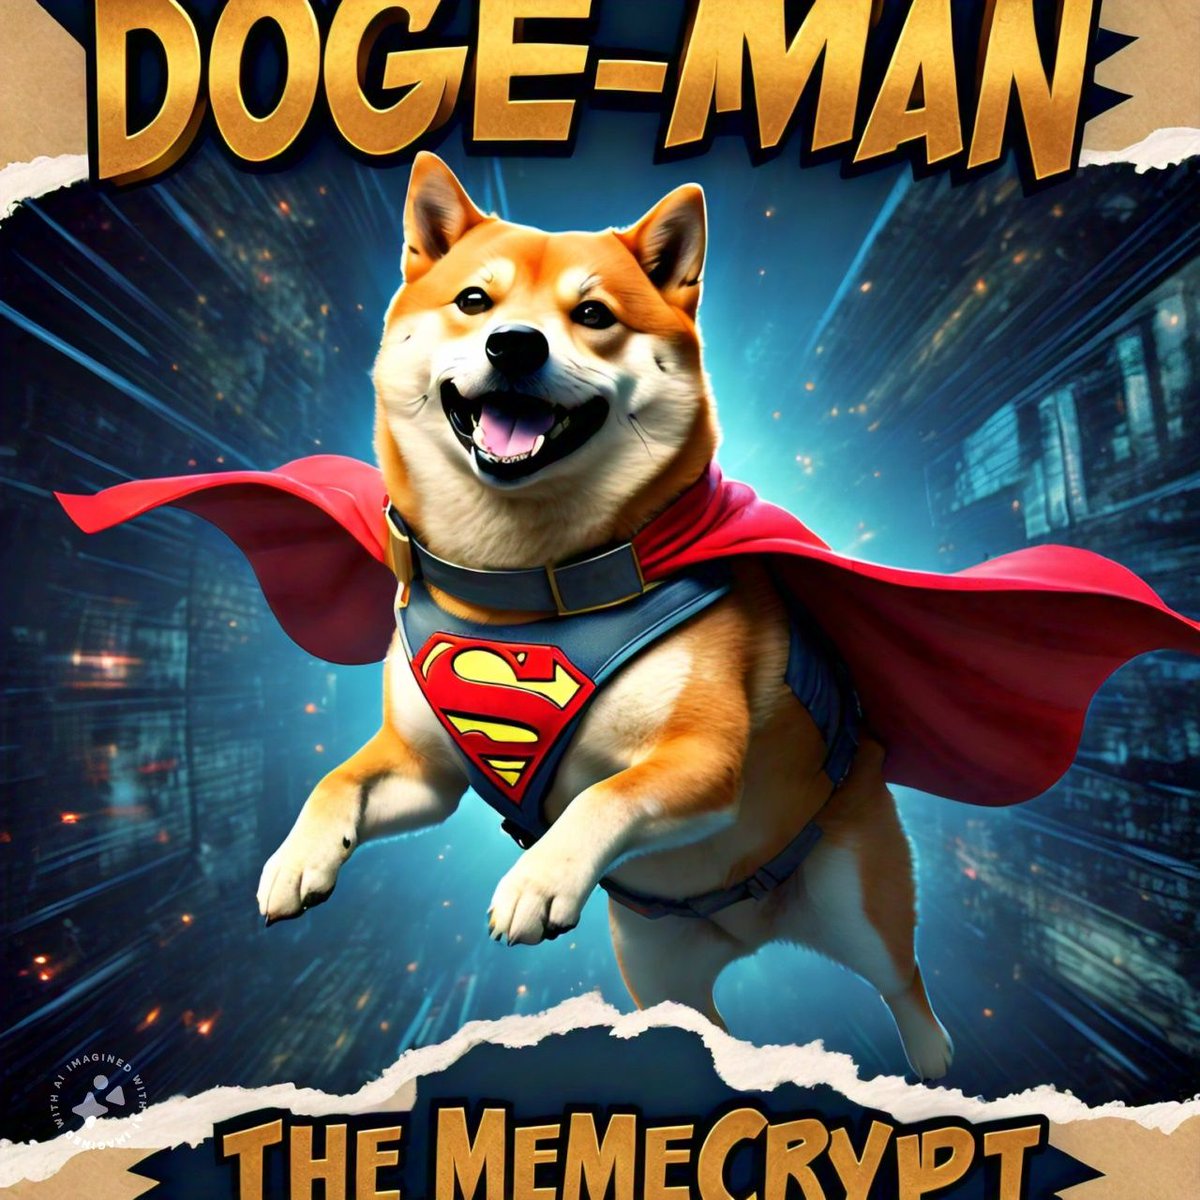 $DOGE is strong, with #Dogechain it's stronger 💪🏻
You can now access #DeFi, #NFTs, #GameFi utilities with your #Dogecoin. #DogeFi 

Dogechain.dog